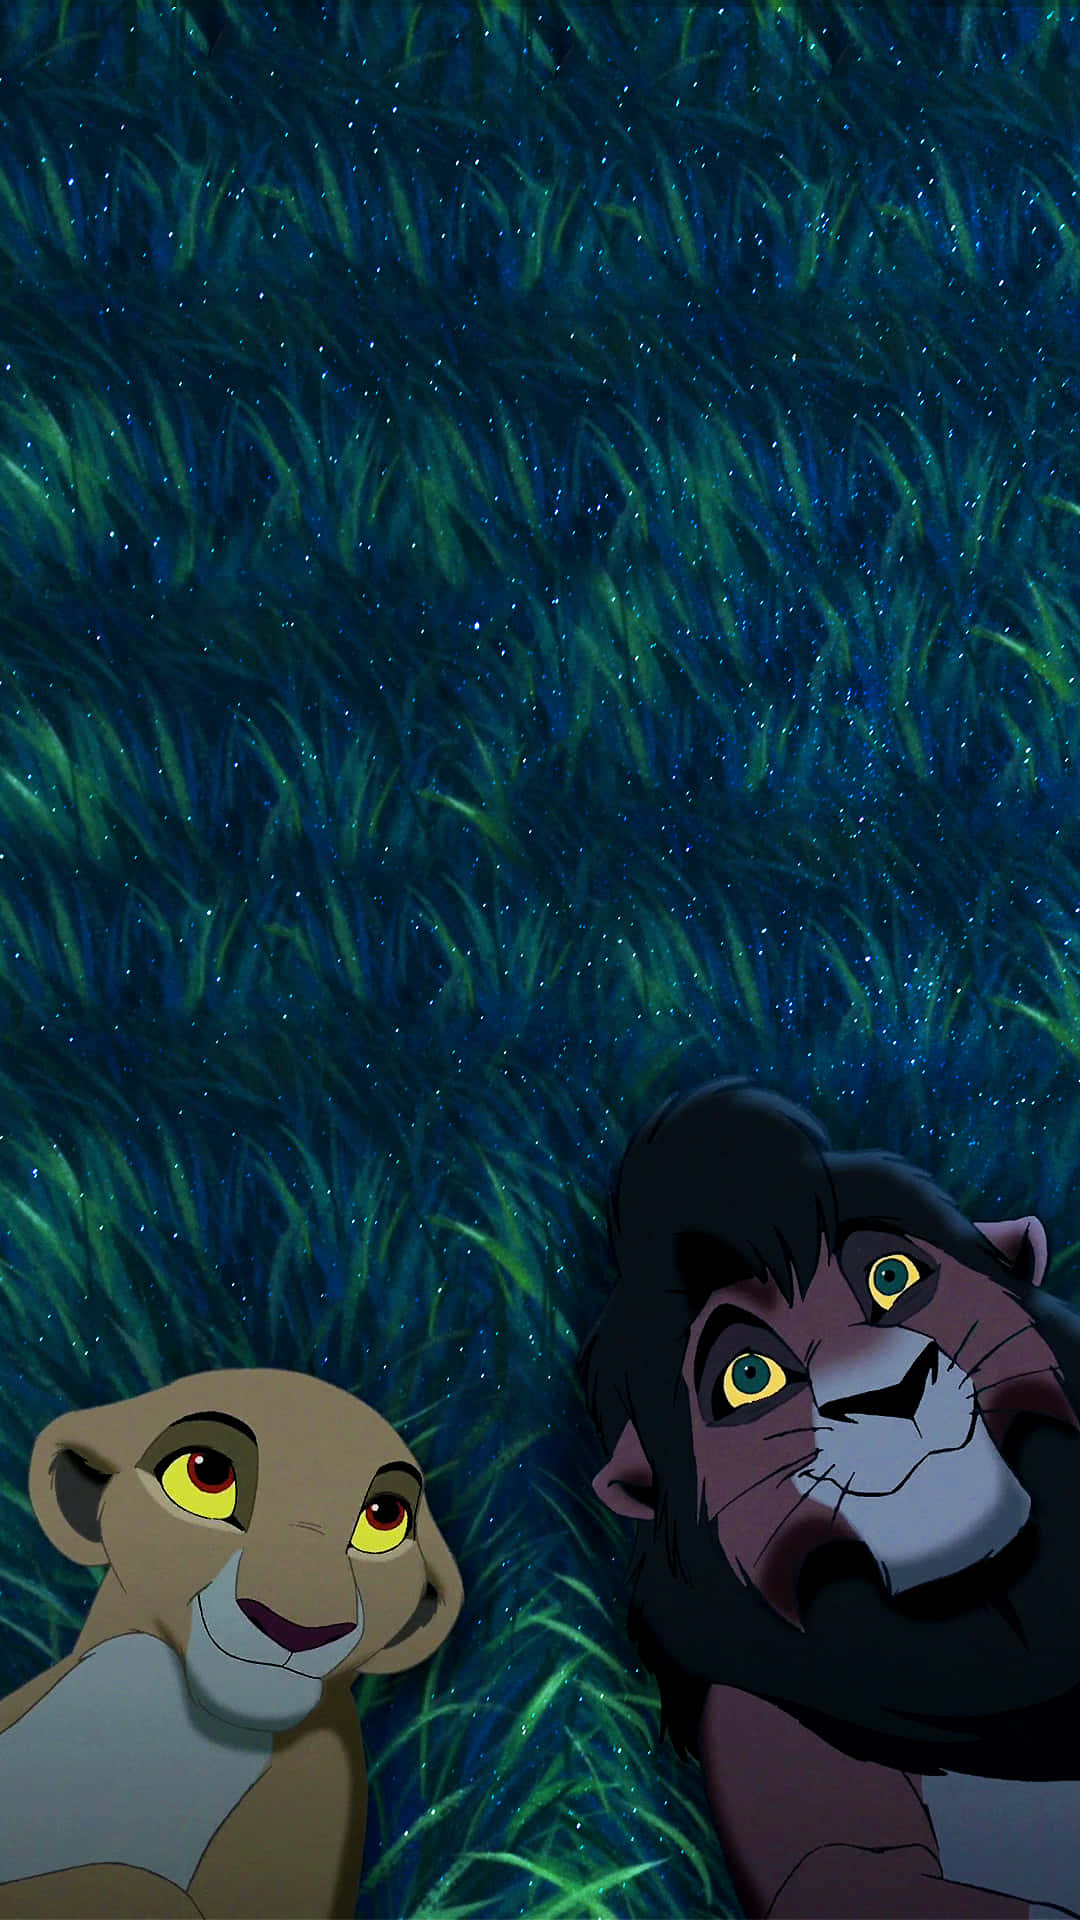 The adorable King of the Jungle - Cute Lion King Wallpaper